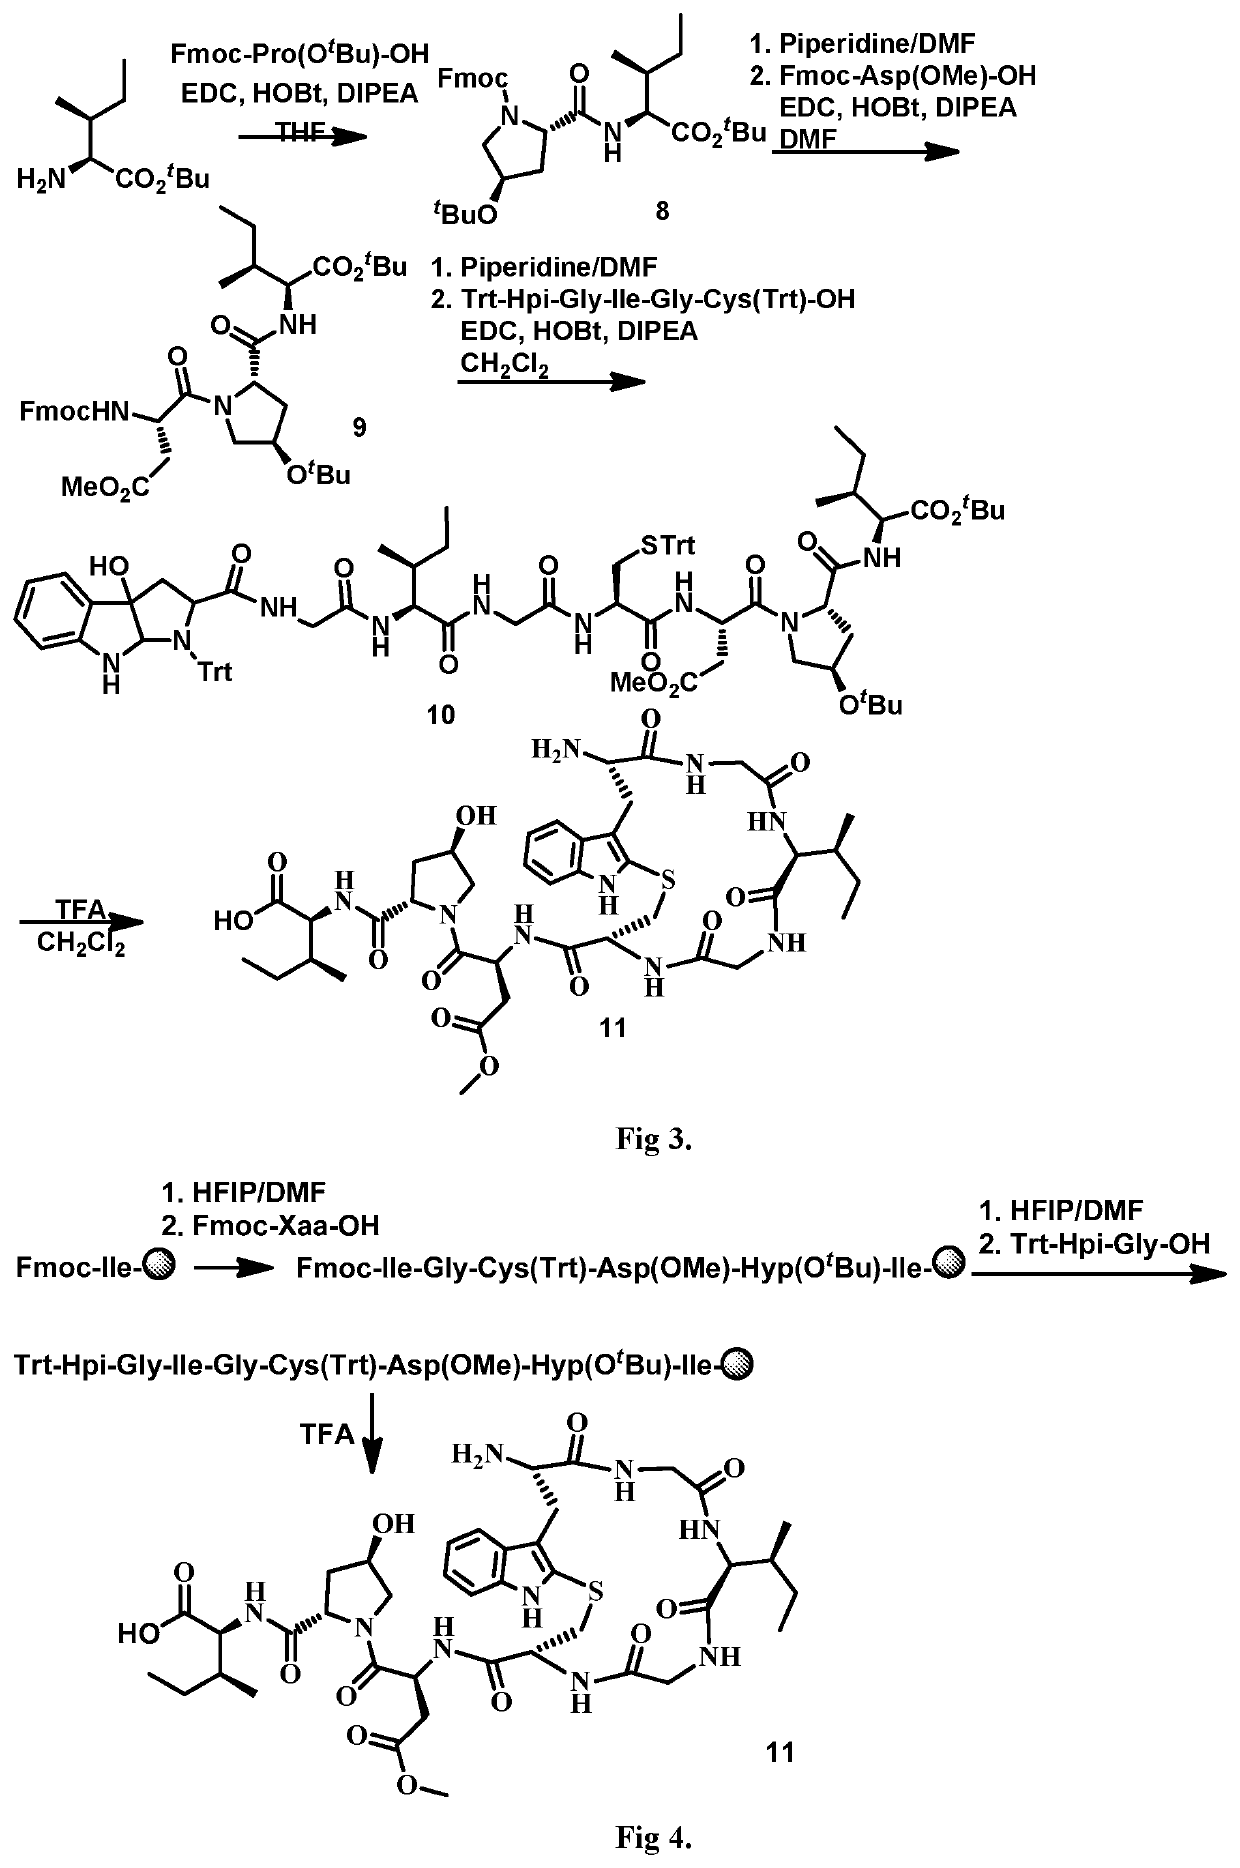 Derivatives of amanita toxins and their conjugation to a cell binding molecule